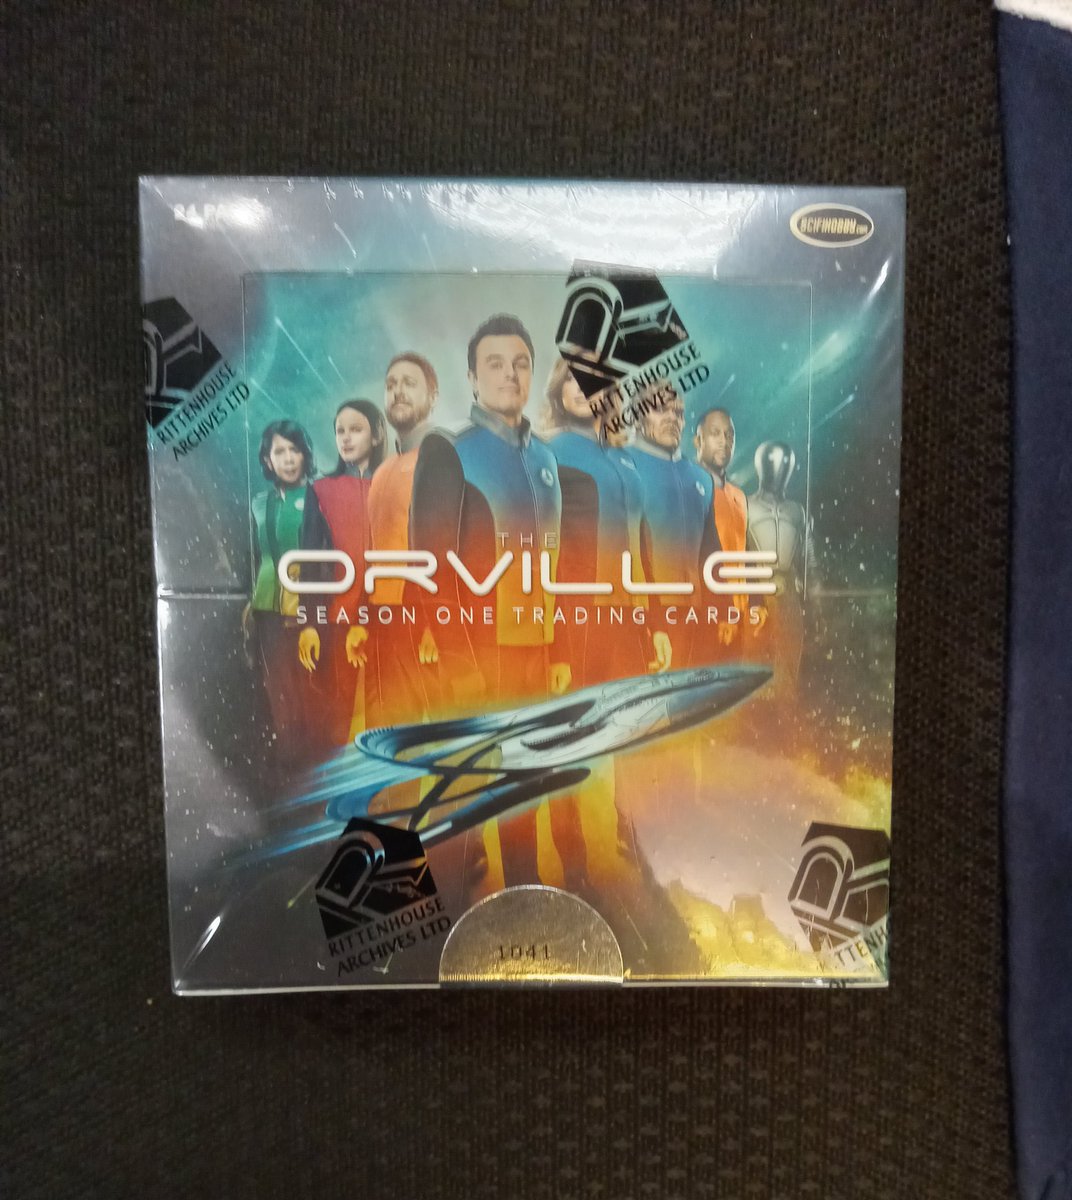 I see another box opening in my future. 😊🚀🚀 #TheOrville #RenrwTheOrville